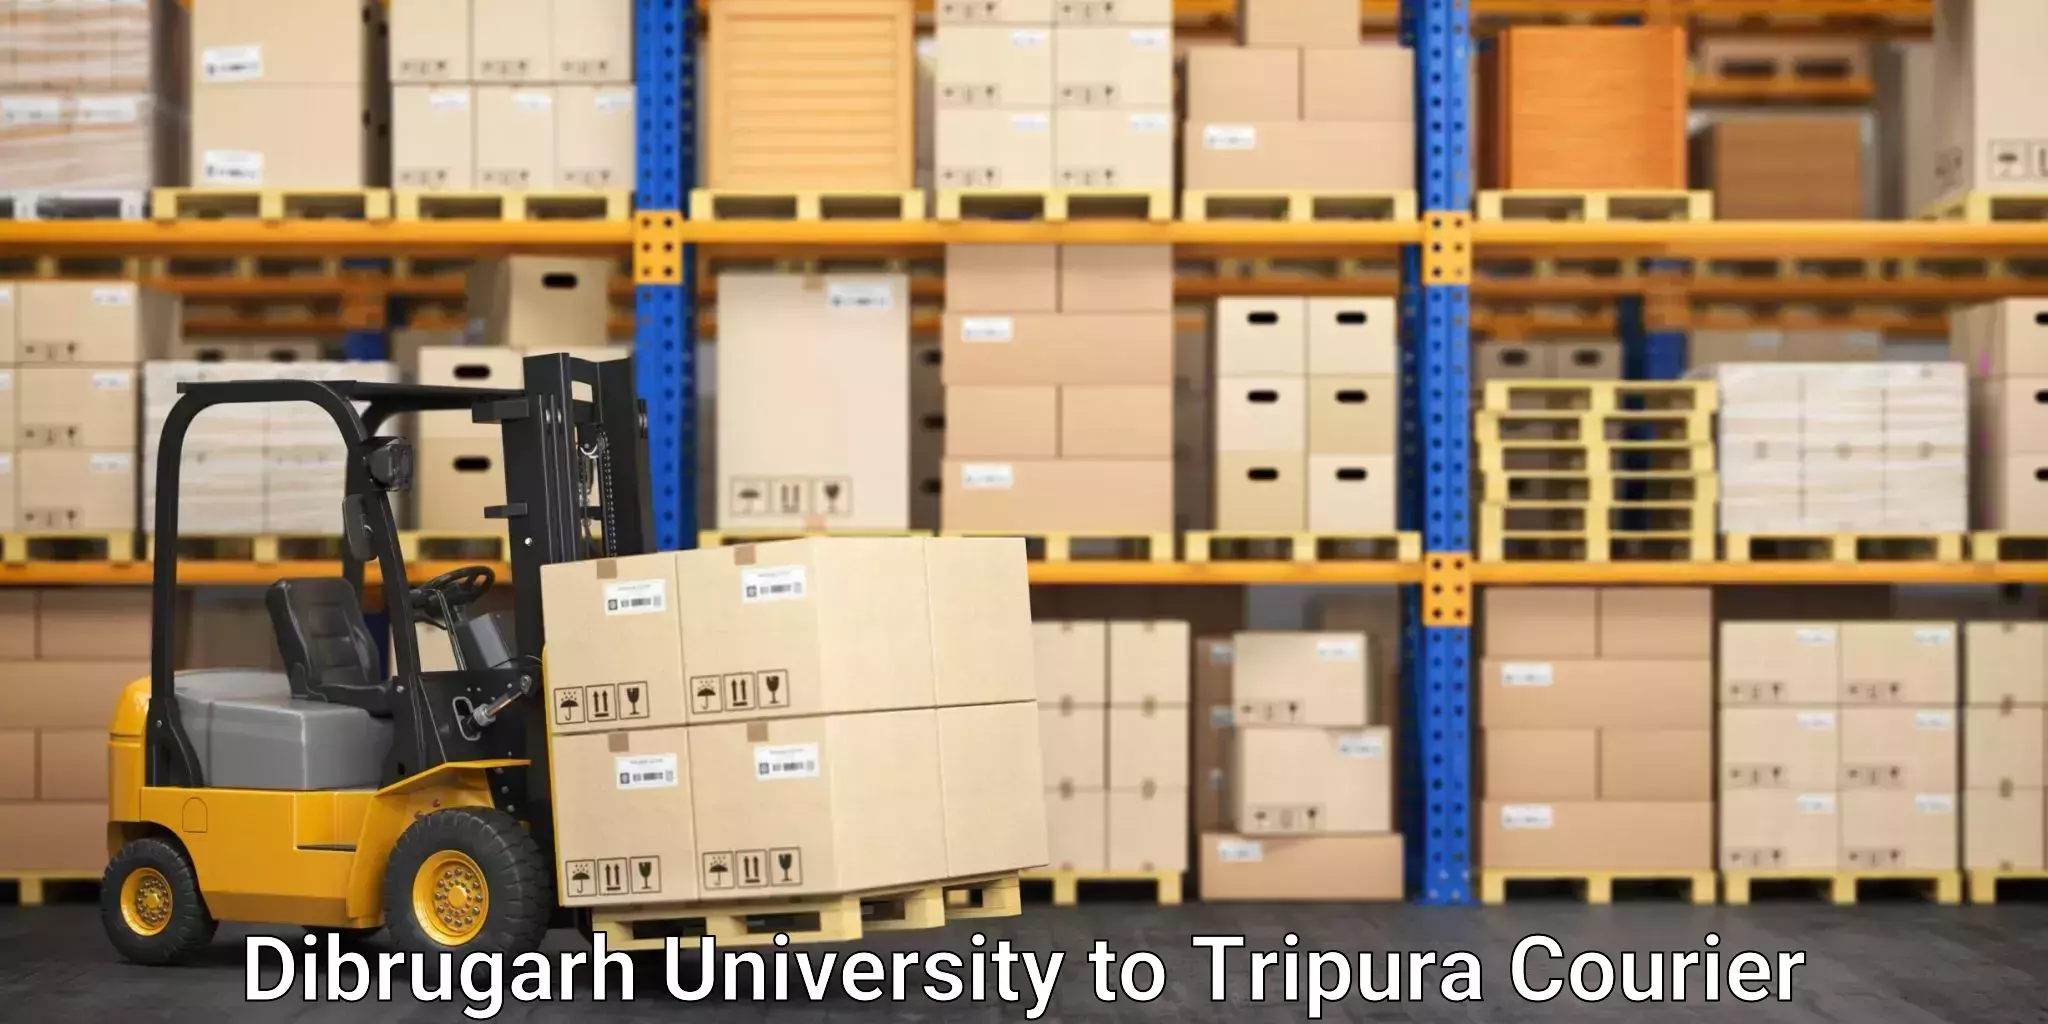 Express package services Dibrugarh University to Dharmanagar